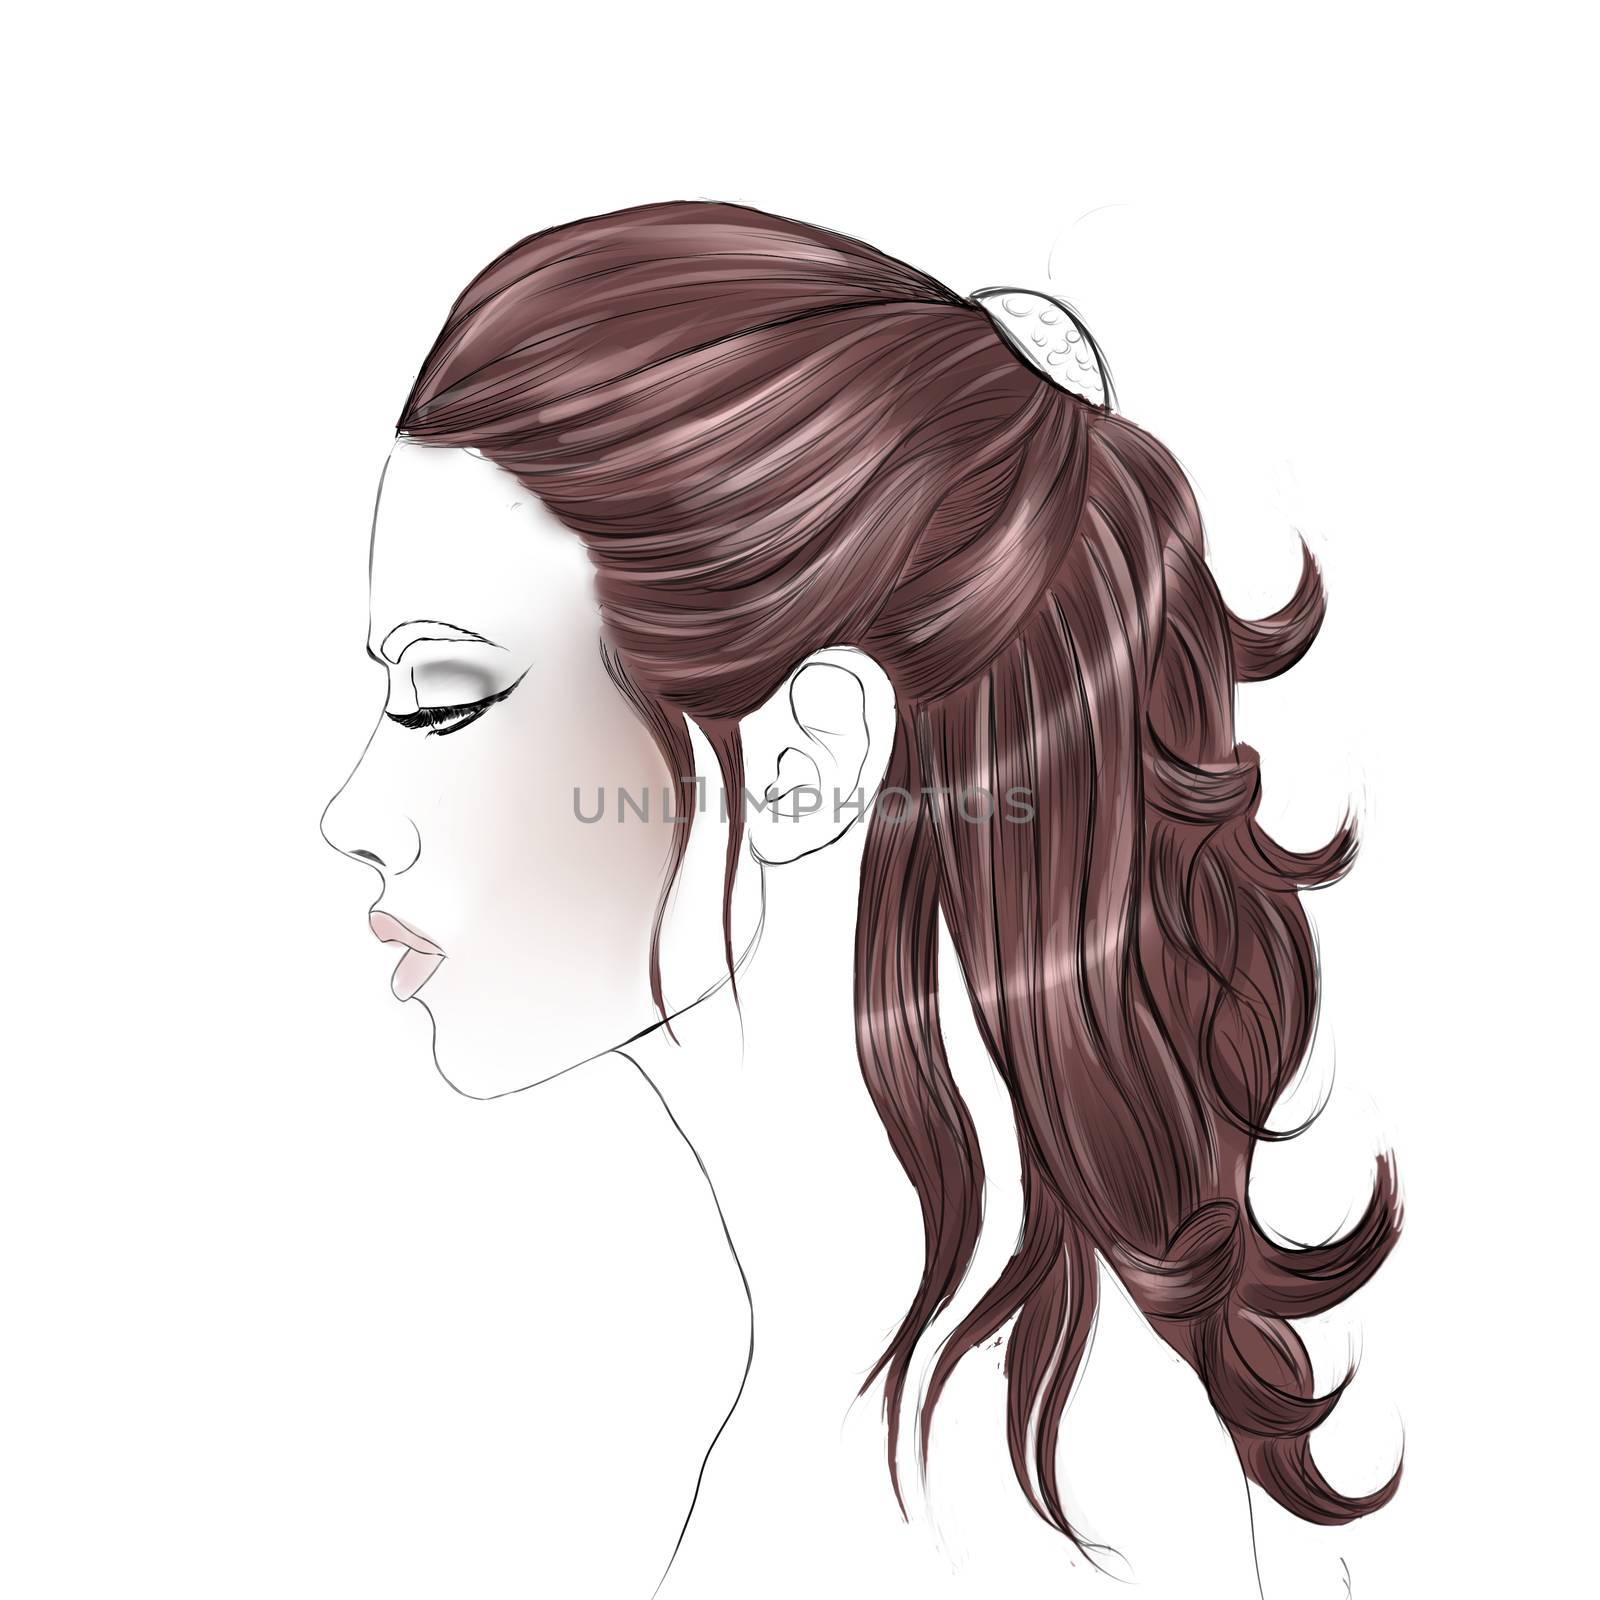 hand drawn raster illustration - profile girl with long wavy brown hair,